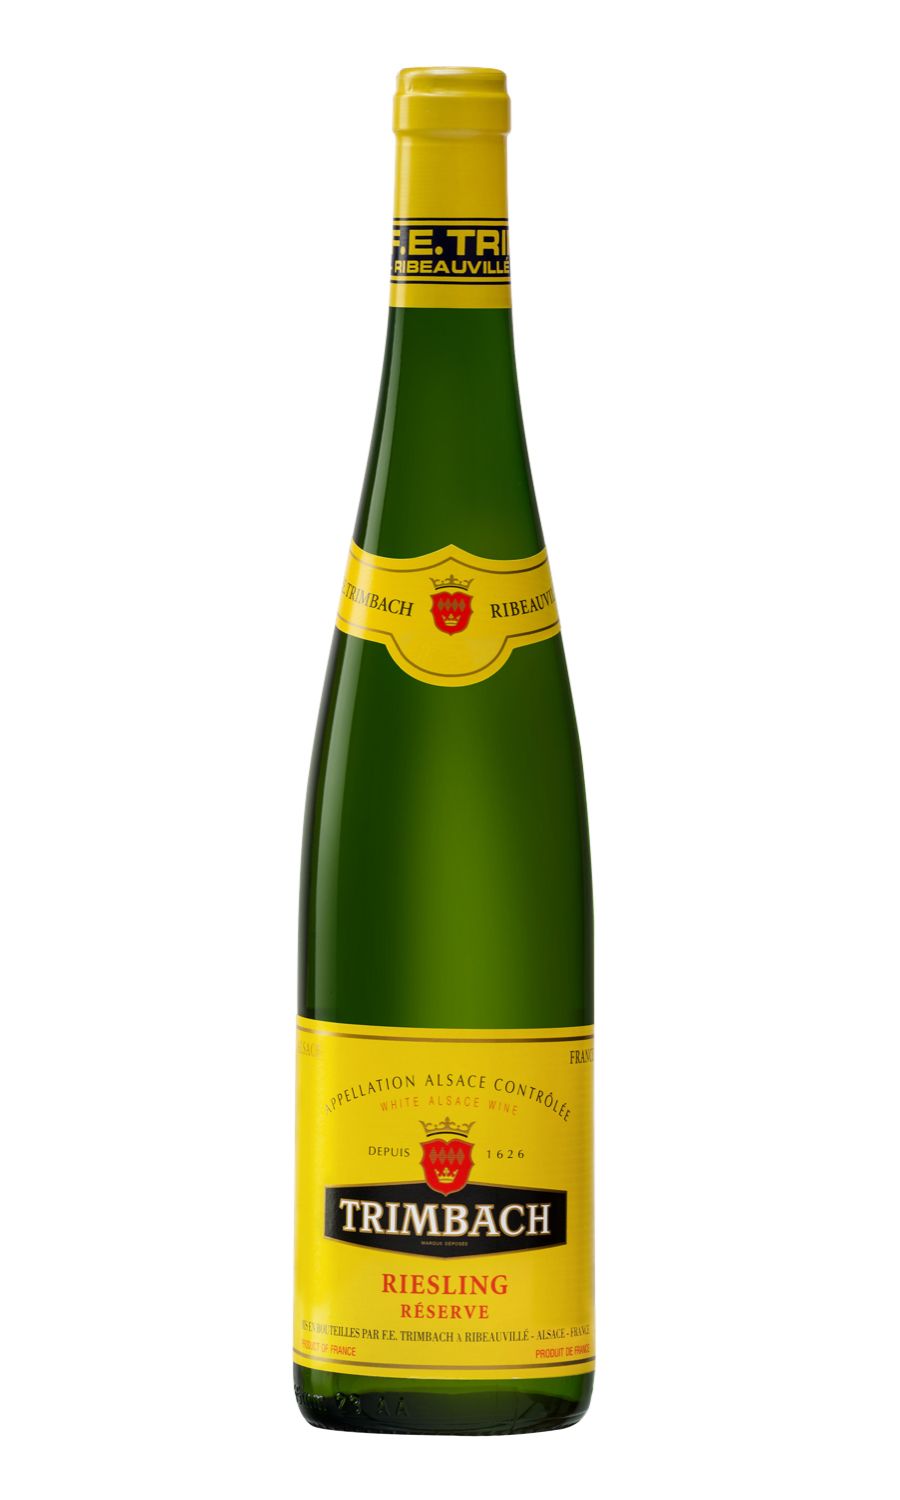 Trimbach riesling reserve, 750ml